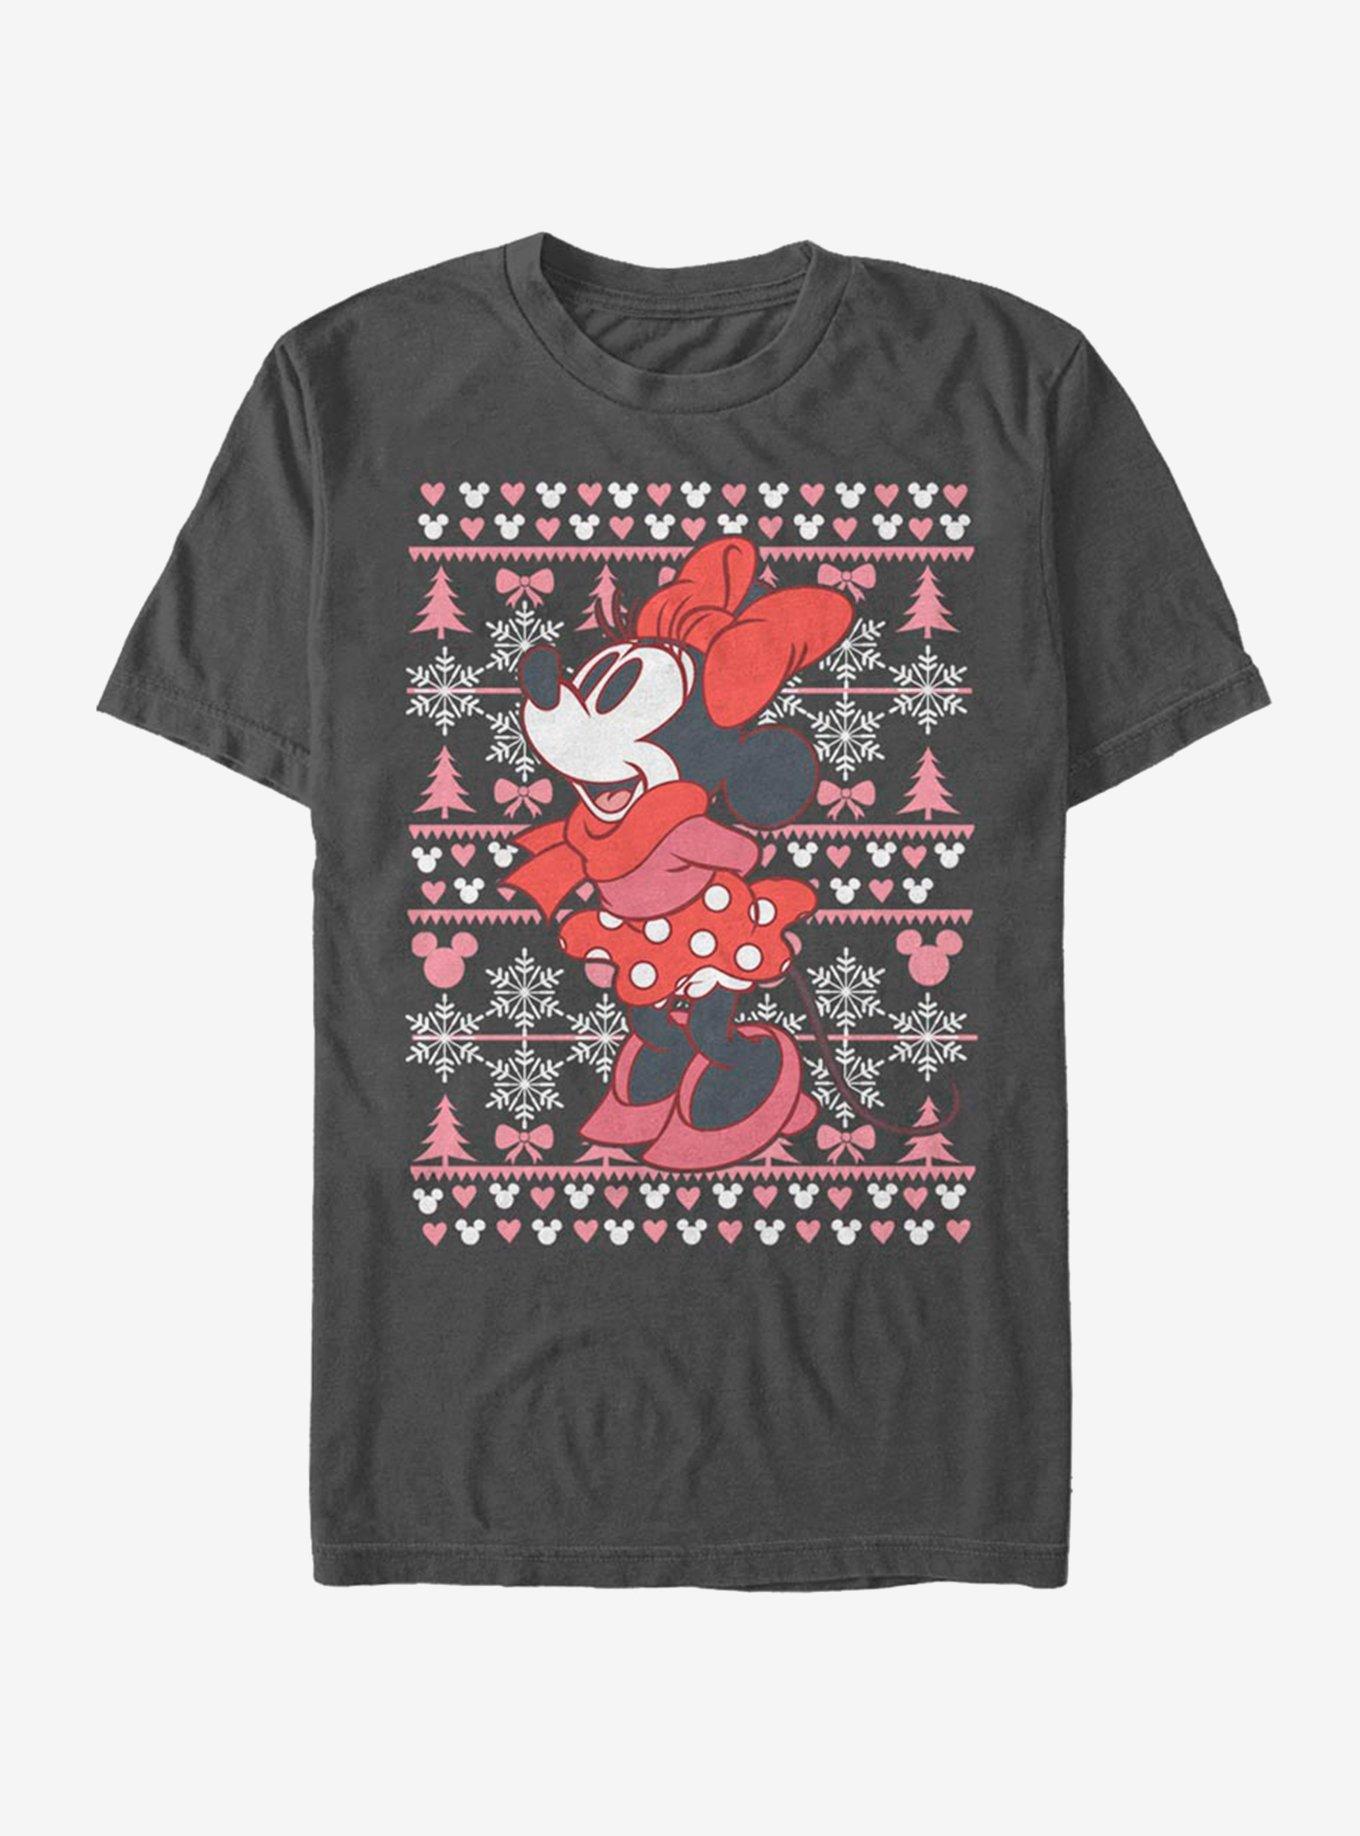 Disney Minnie Mouse Holiday Winter Sweater T-Shirt